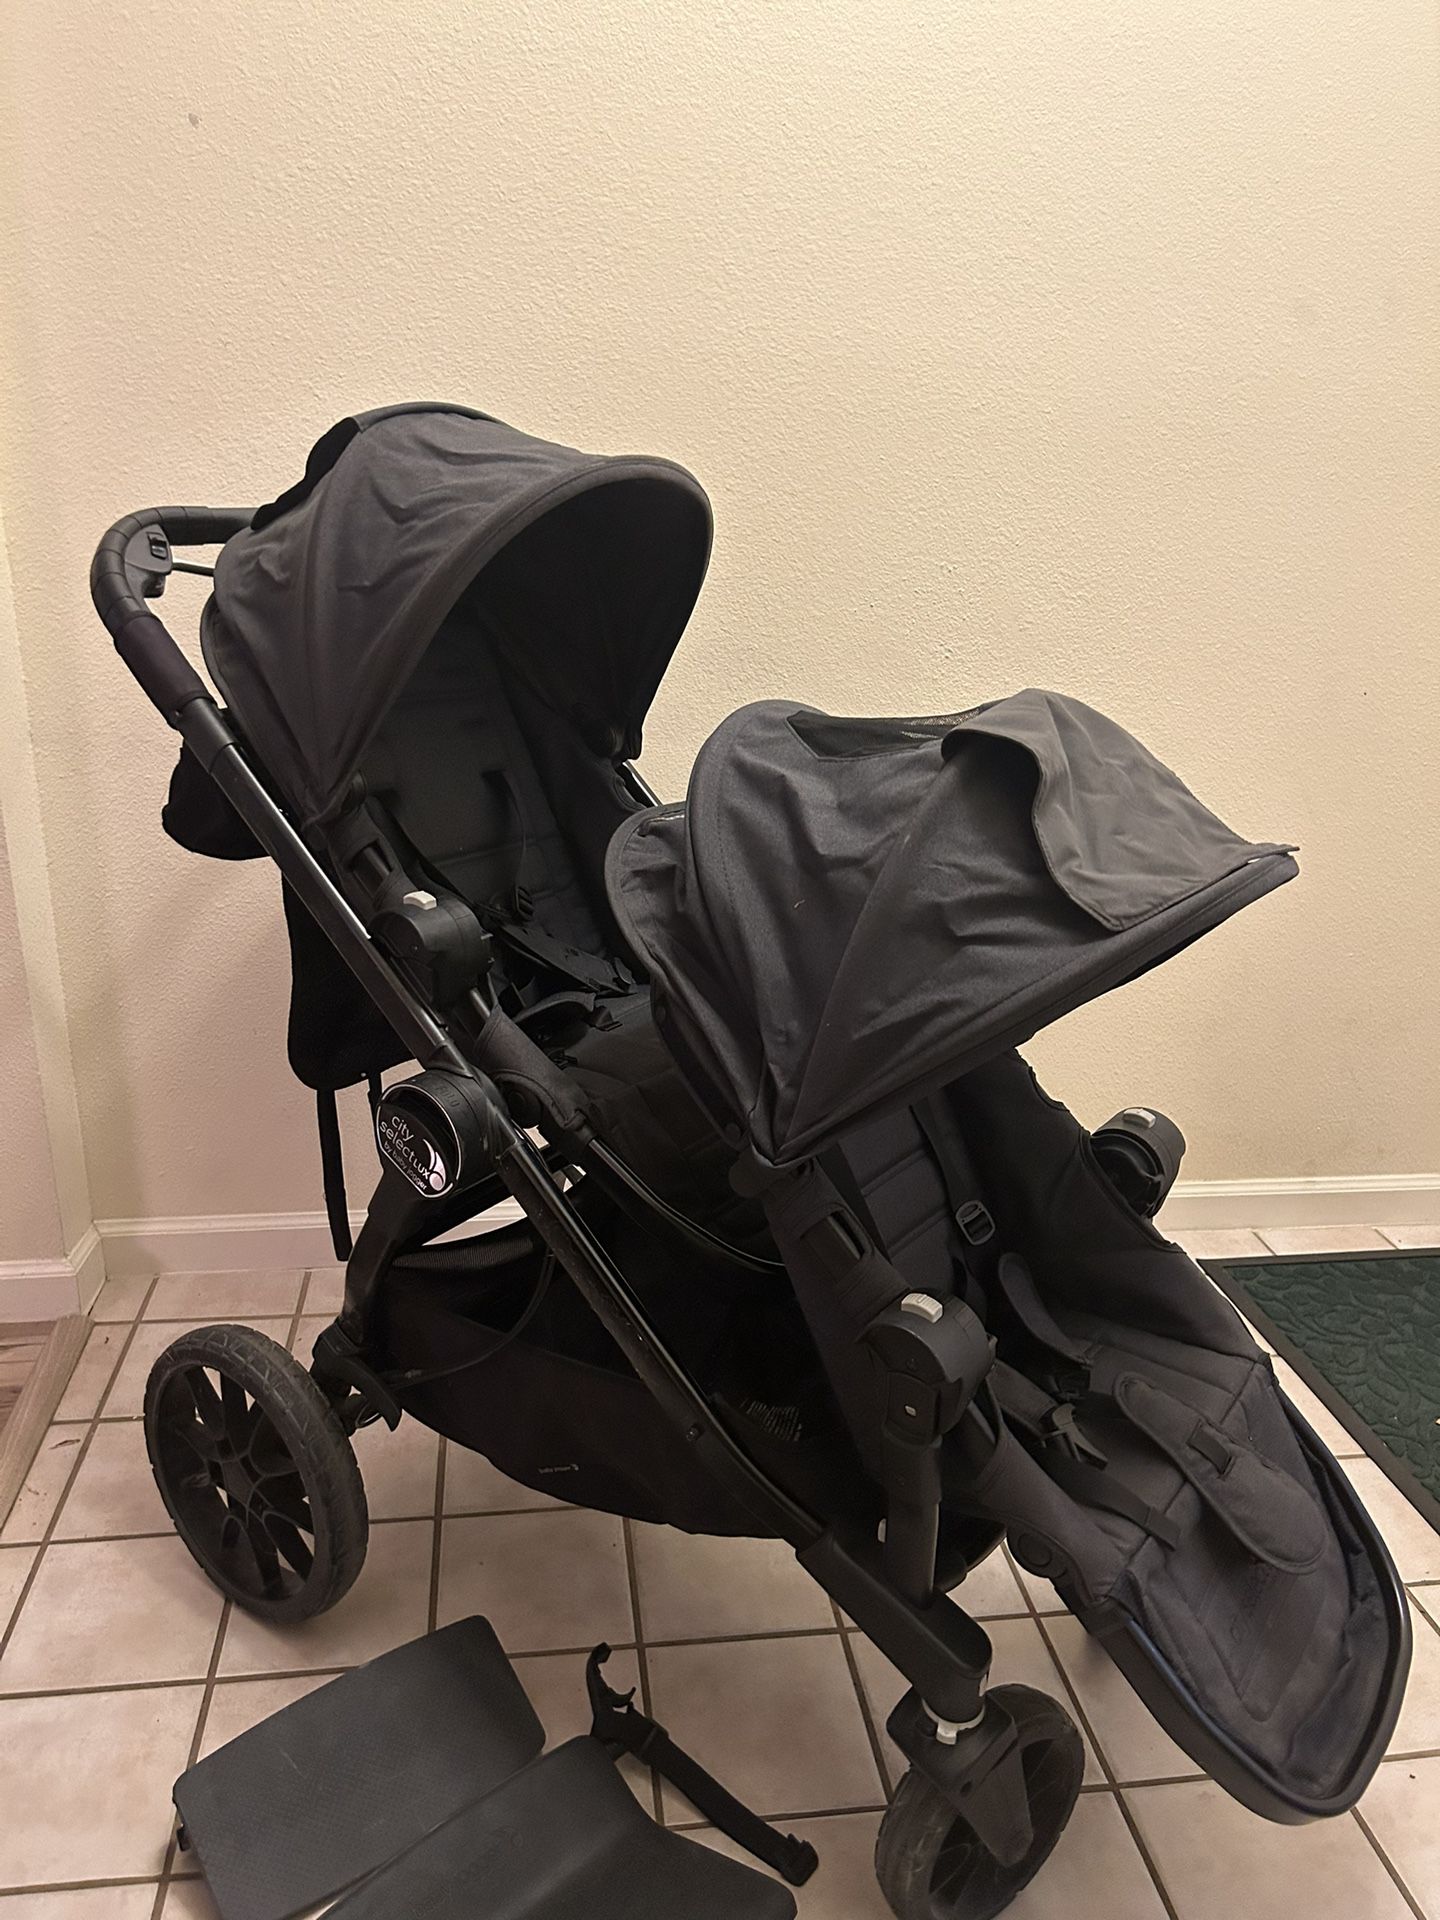 City Select Baby Jogger/ Double stroller 